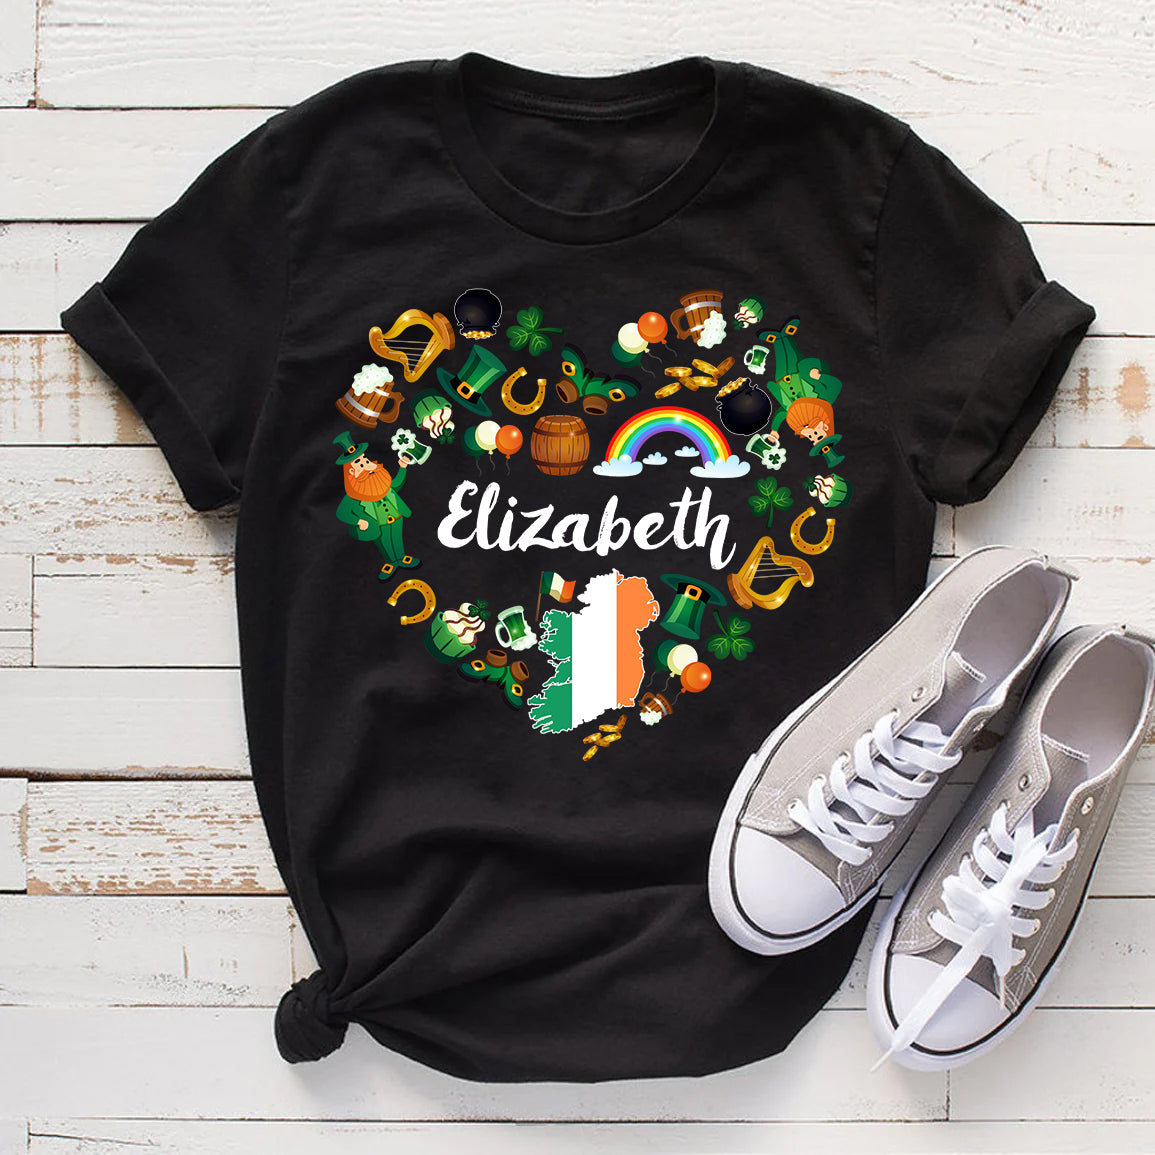 Custom Ireland Heart T-shirt With Your Name